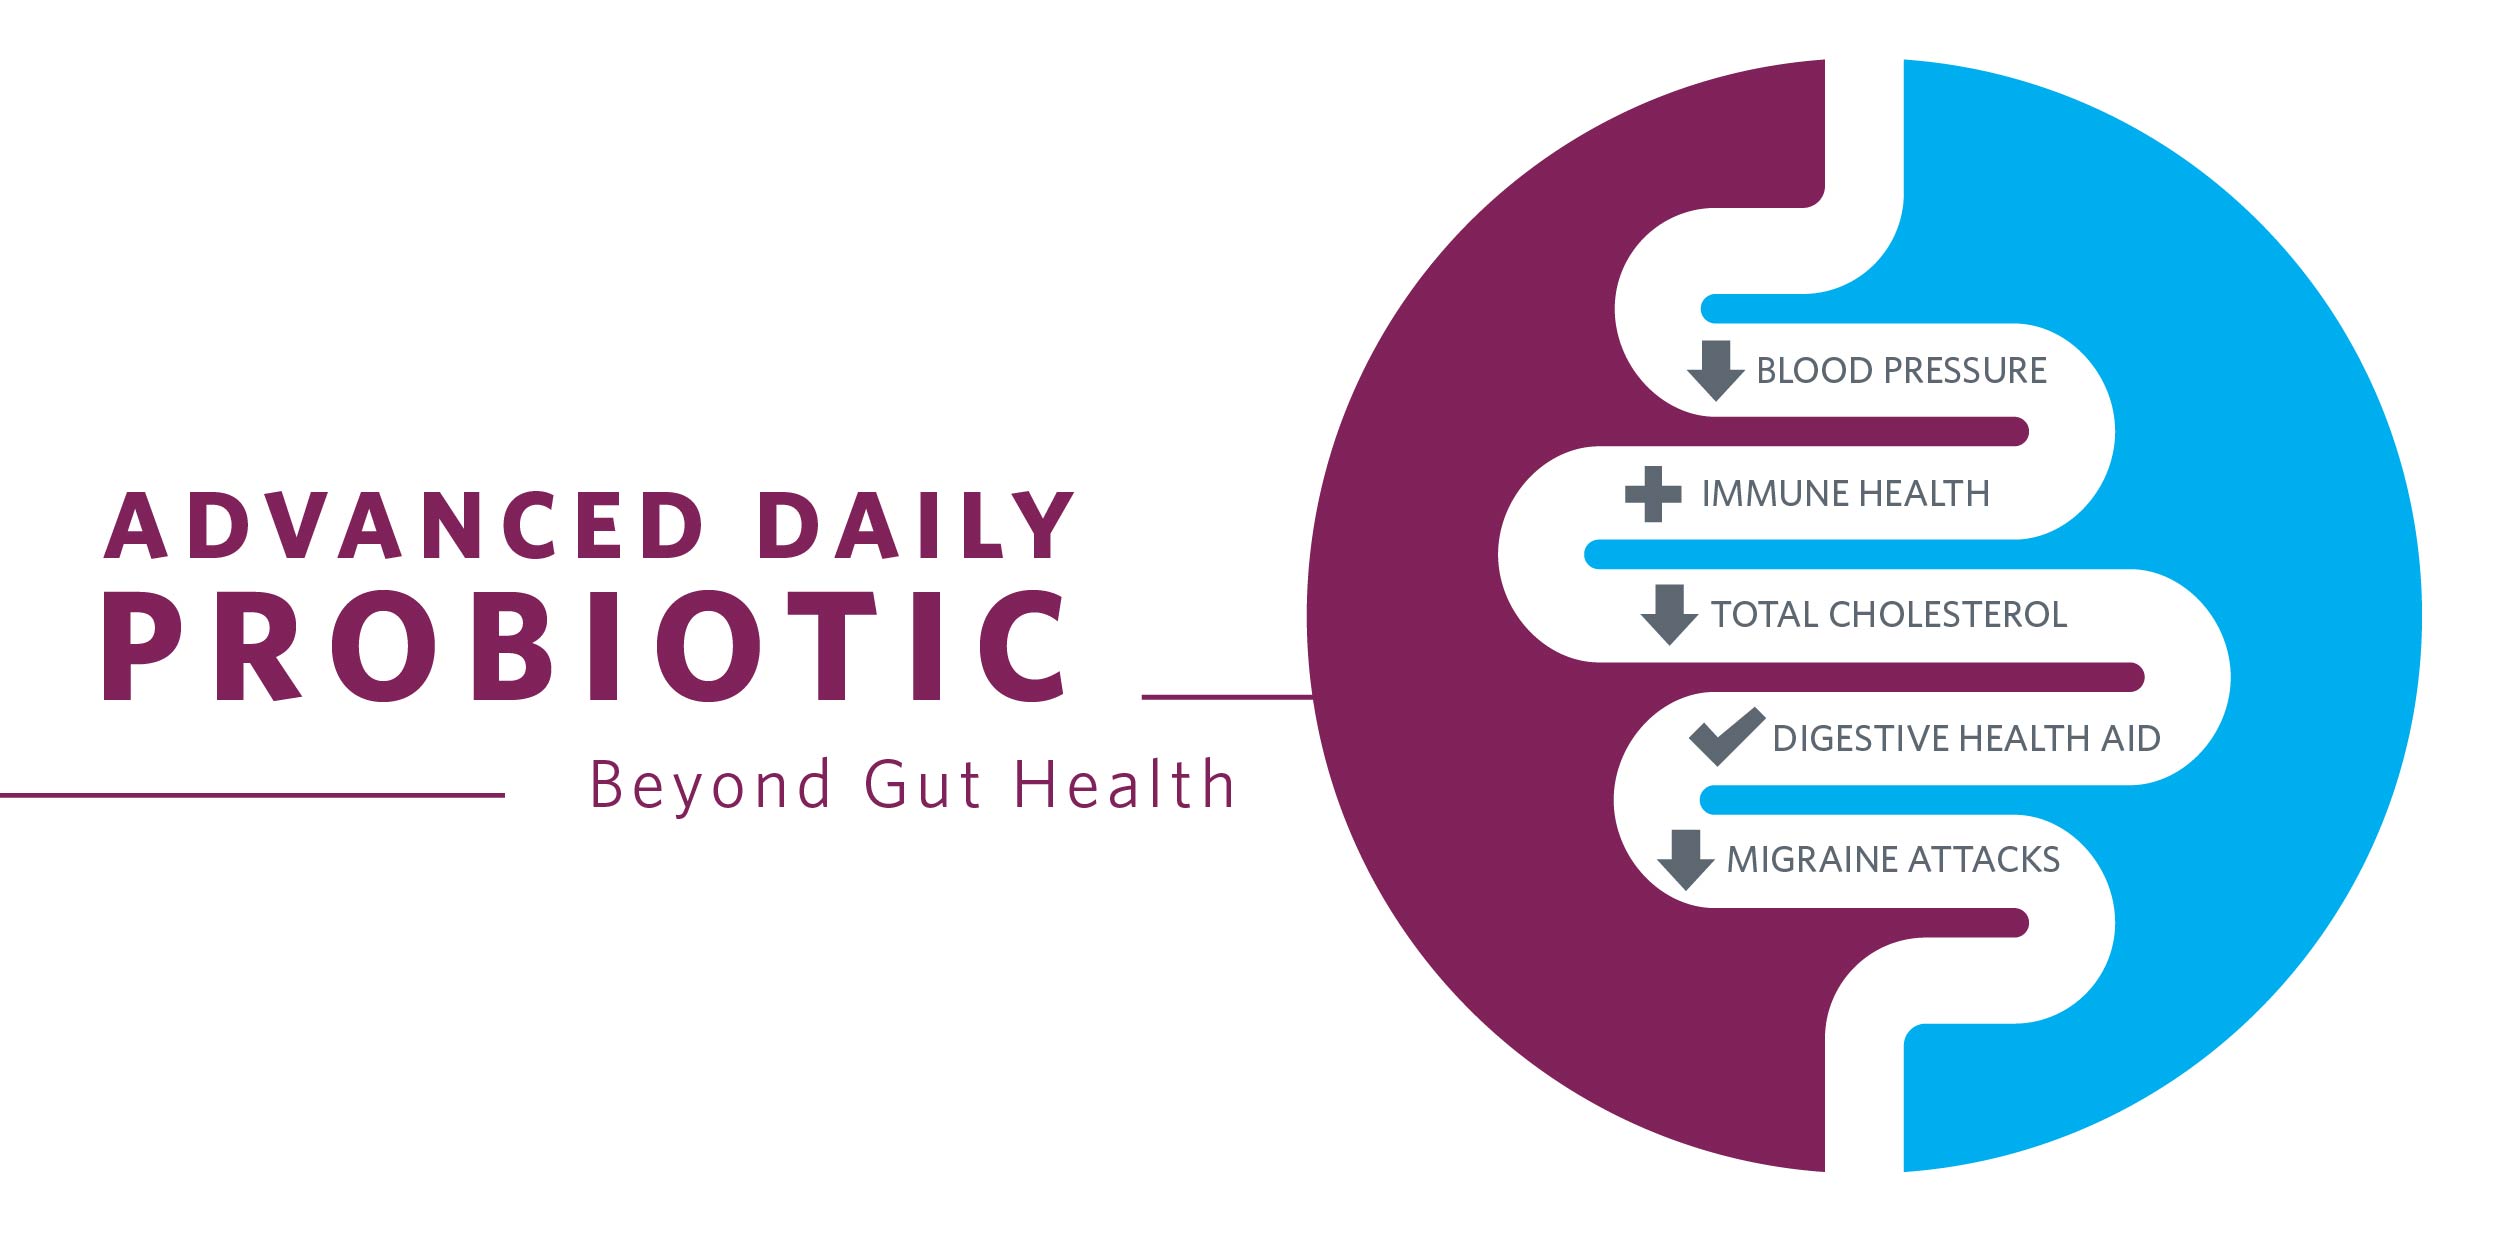 Infographic for Advanced Daily Probiotic highlighting probiotic benefits beyond gut health